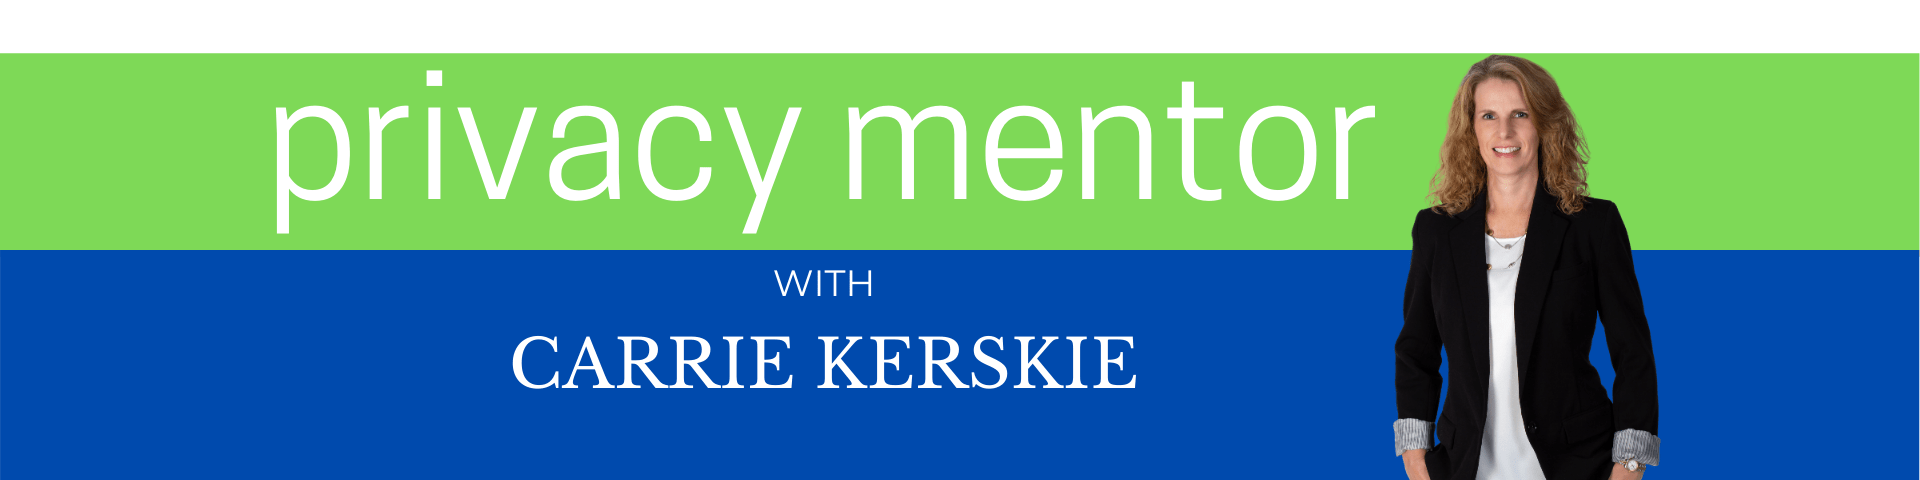 Privacy mentor podcast with Carrie Kerskie